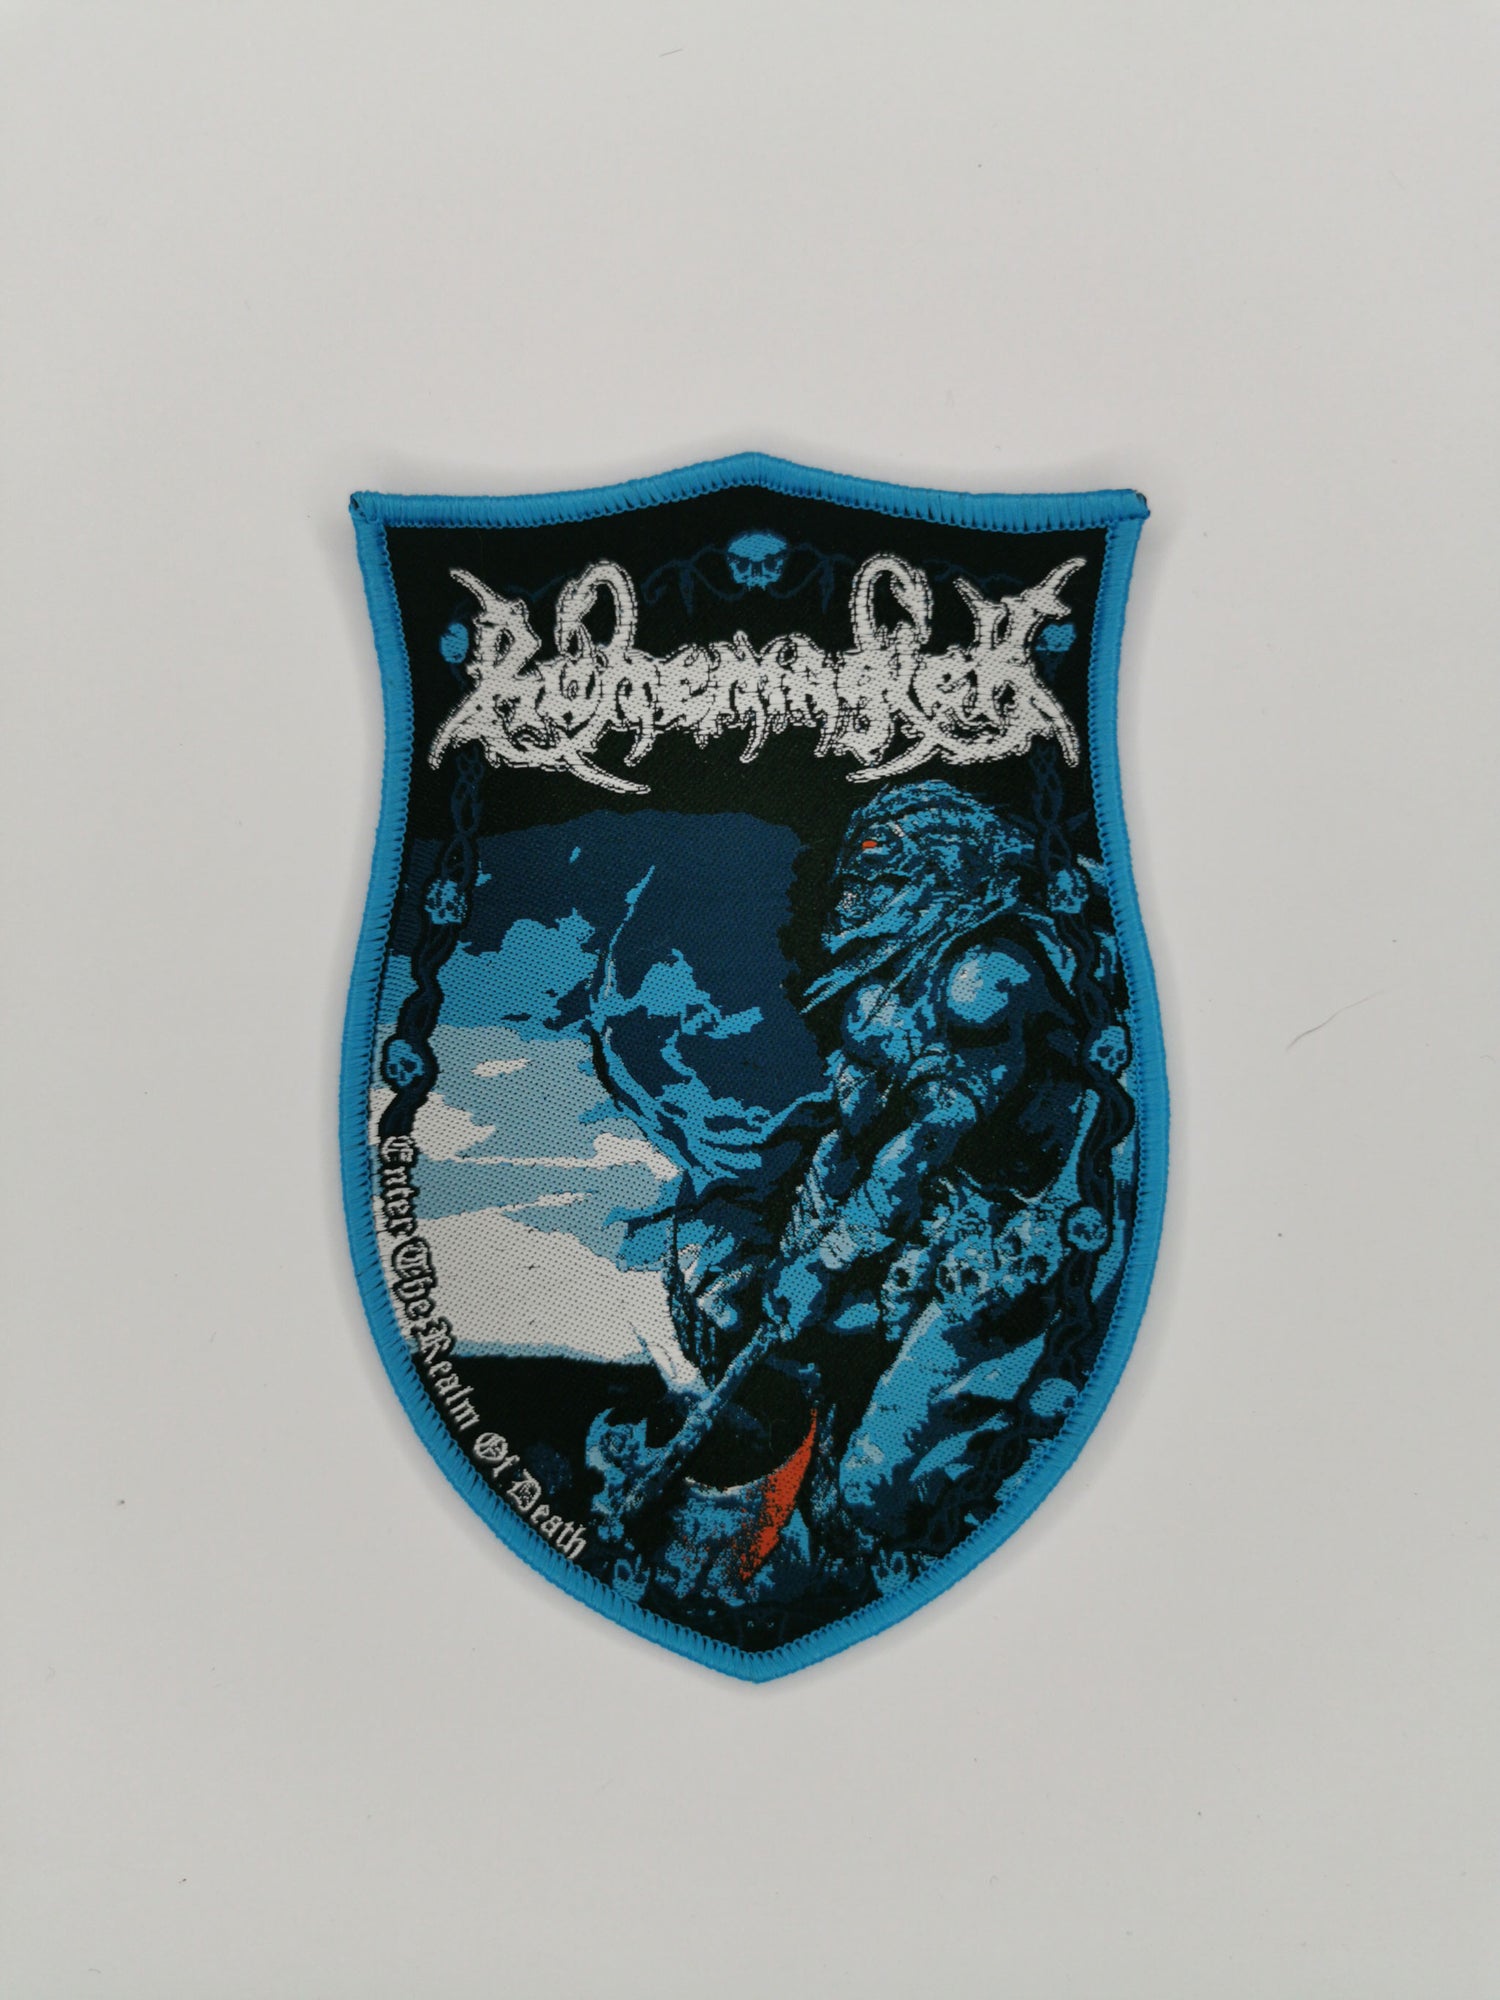 Temporal Dimensions Patches Runemagick Enter the Realm of Death Metal Blue Border Woven Patch